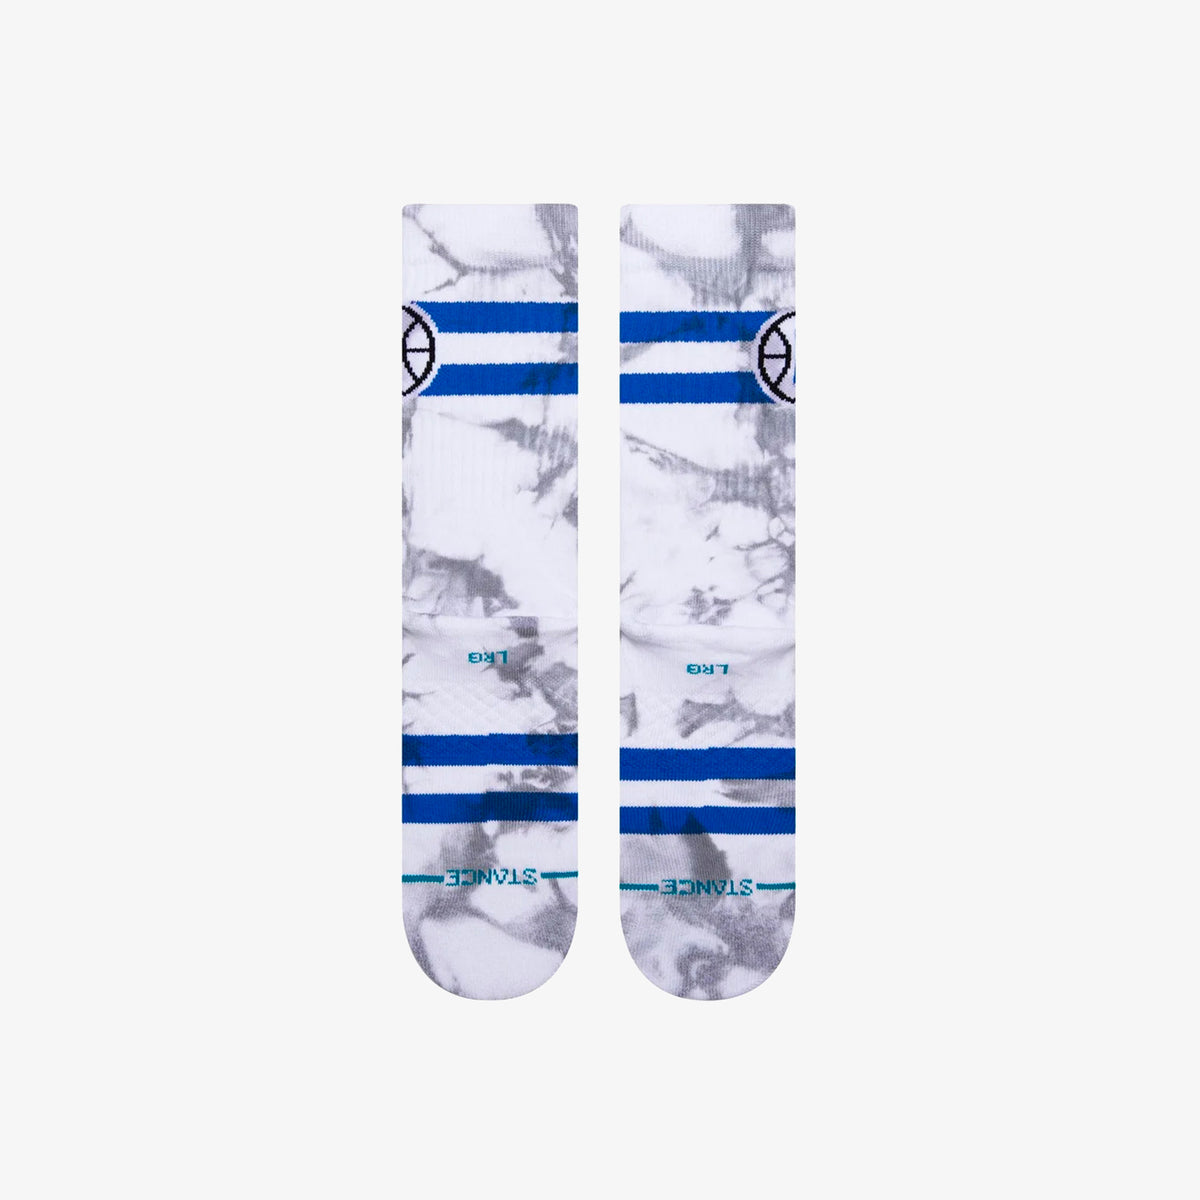 Los Angeles Clippers Dyed Socks